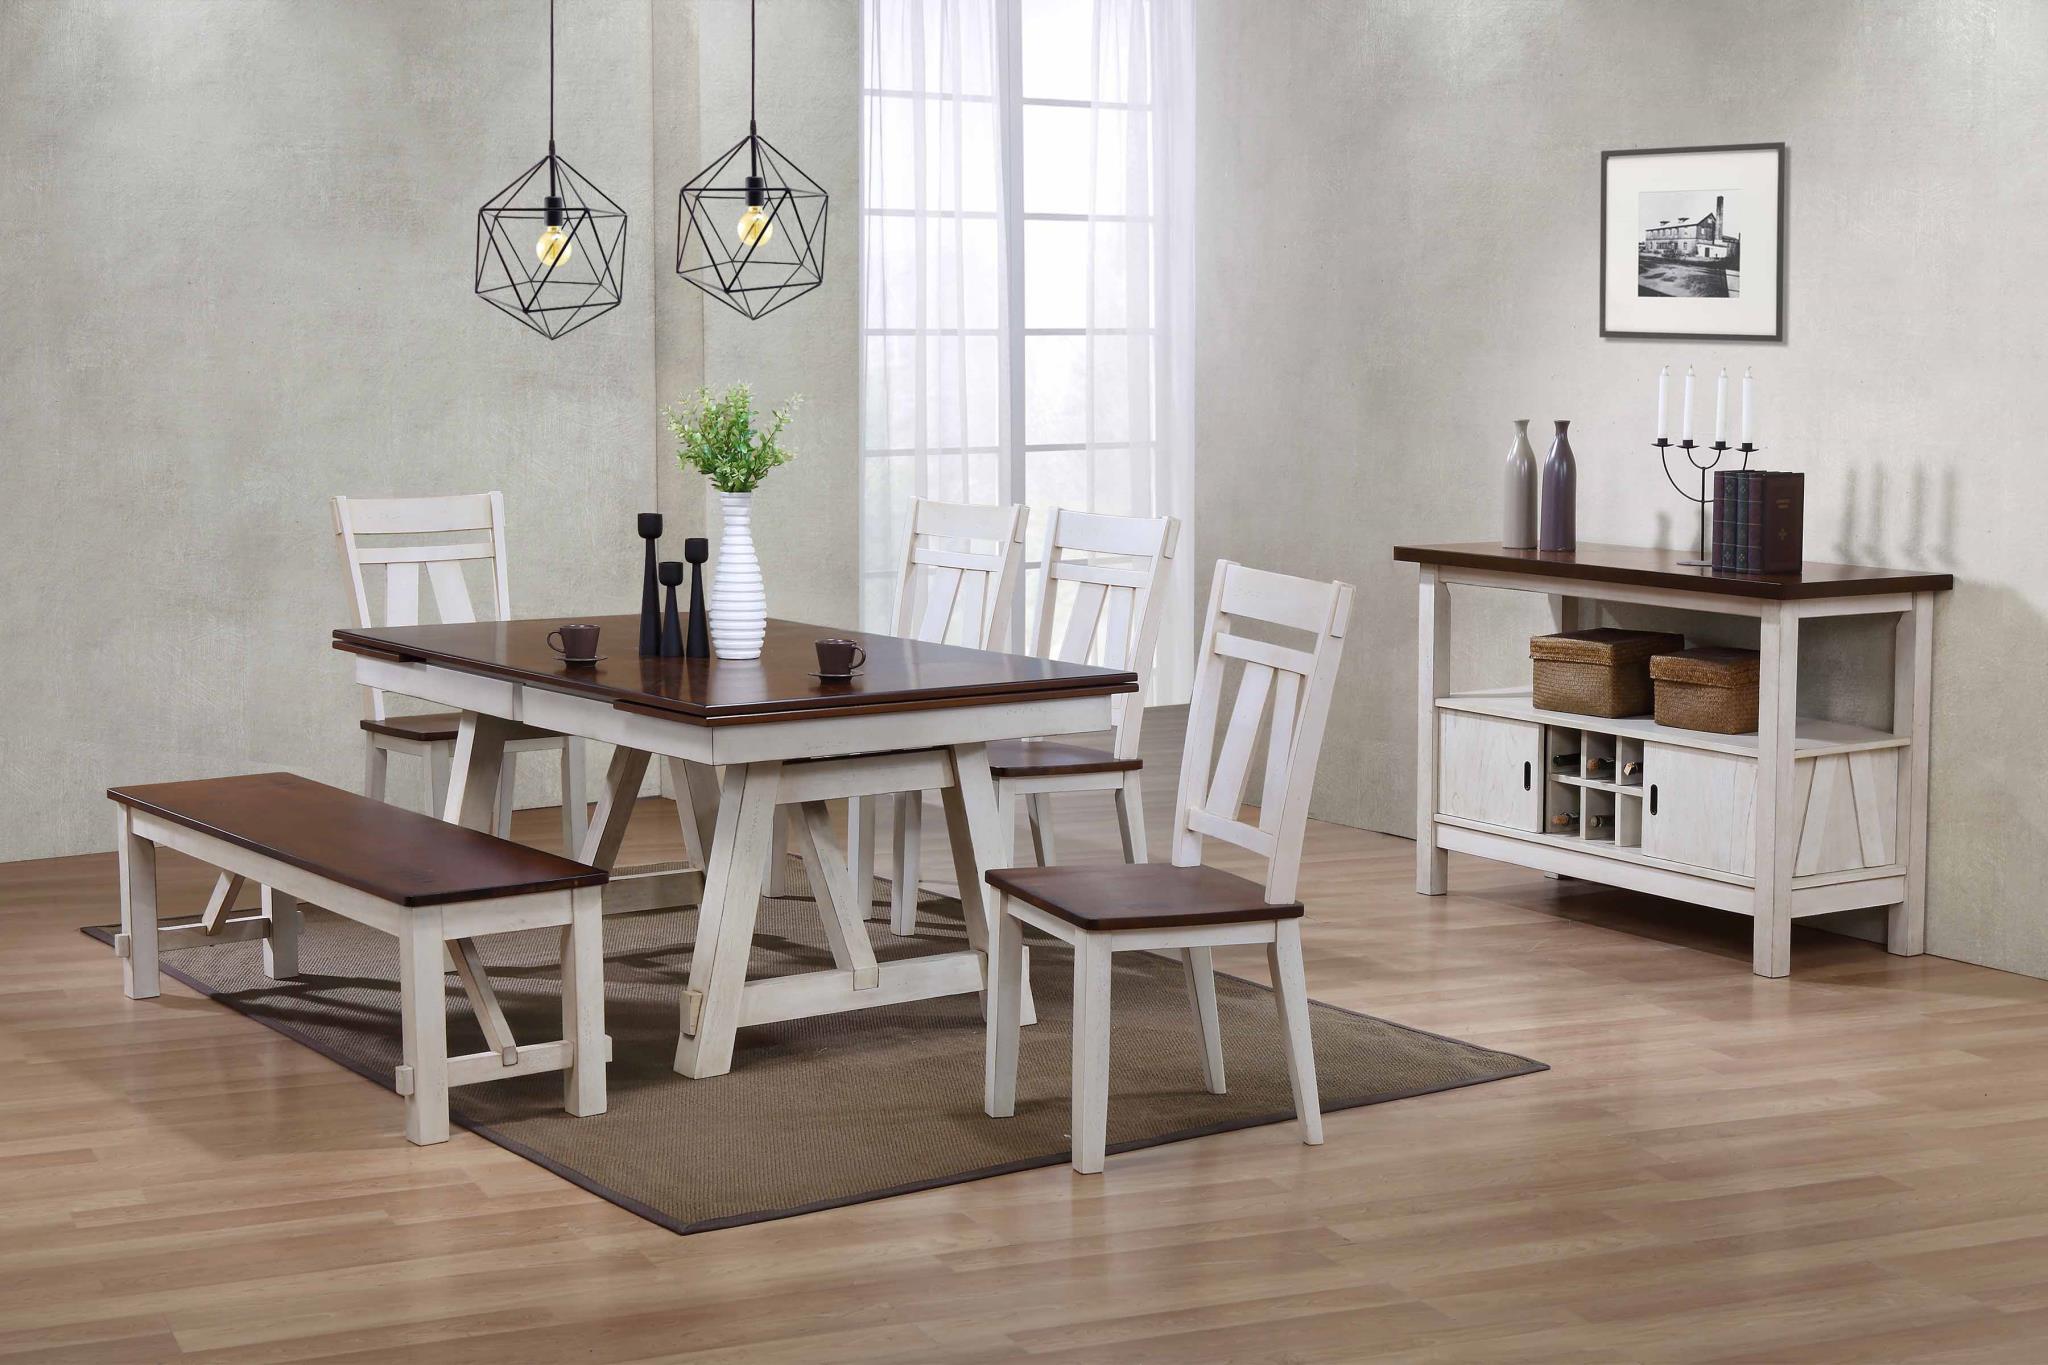 Rustic, Farmhouse Dining Room Set Winslow 5636-6pcs in Cream, Brown 